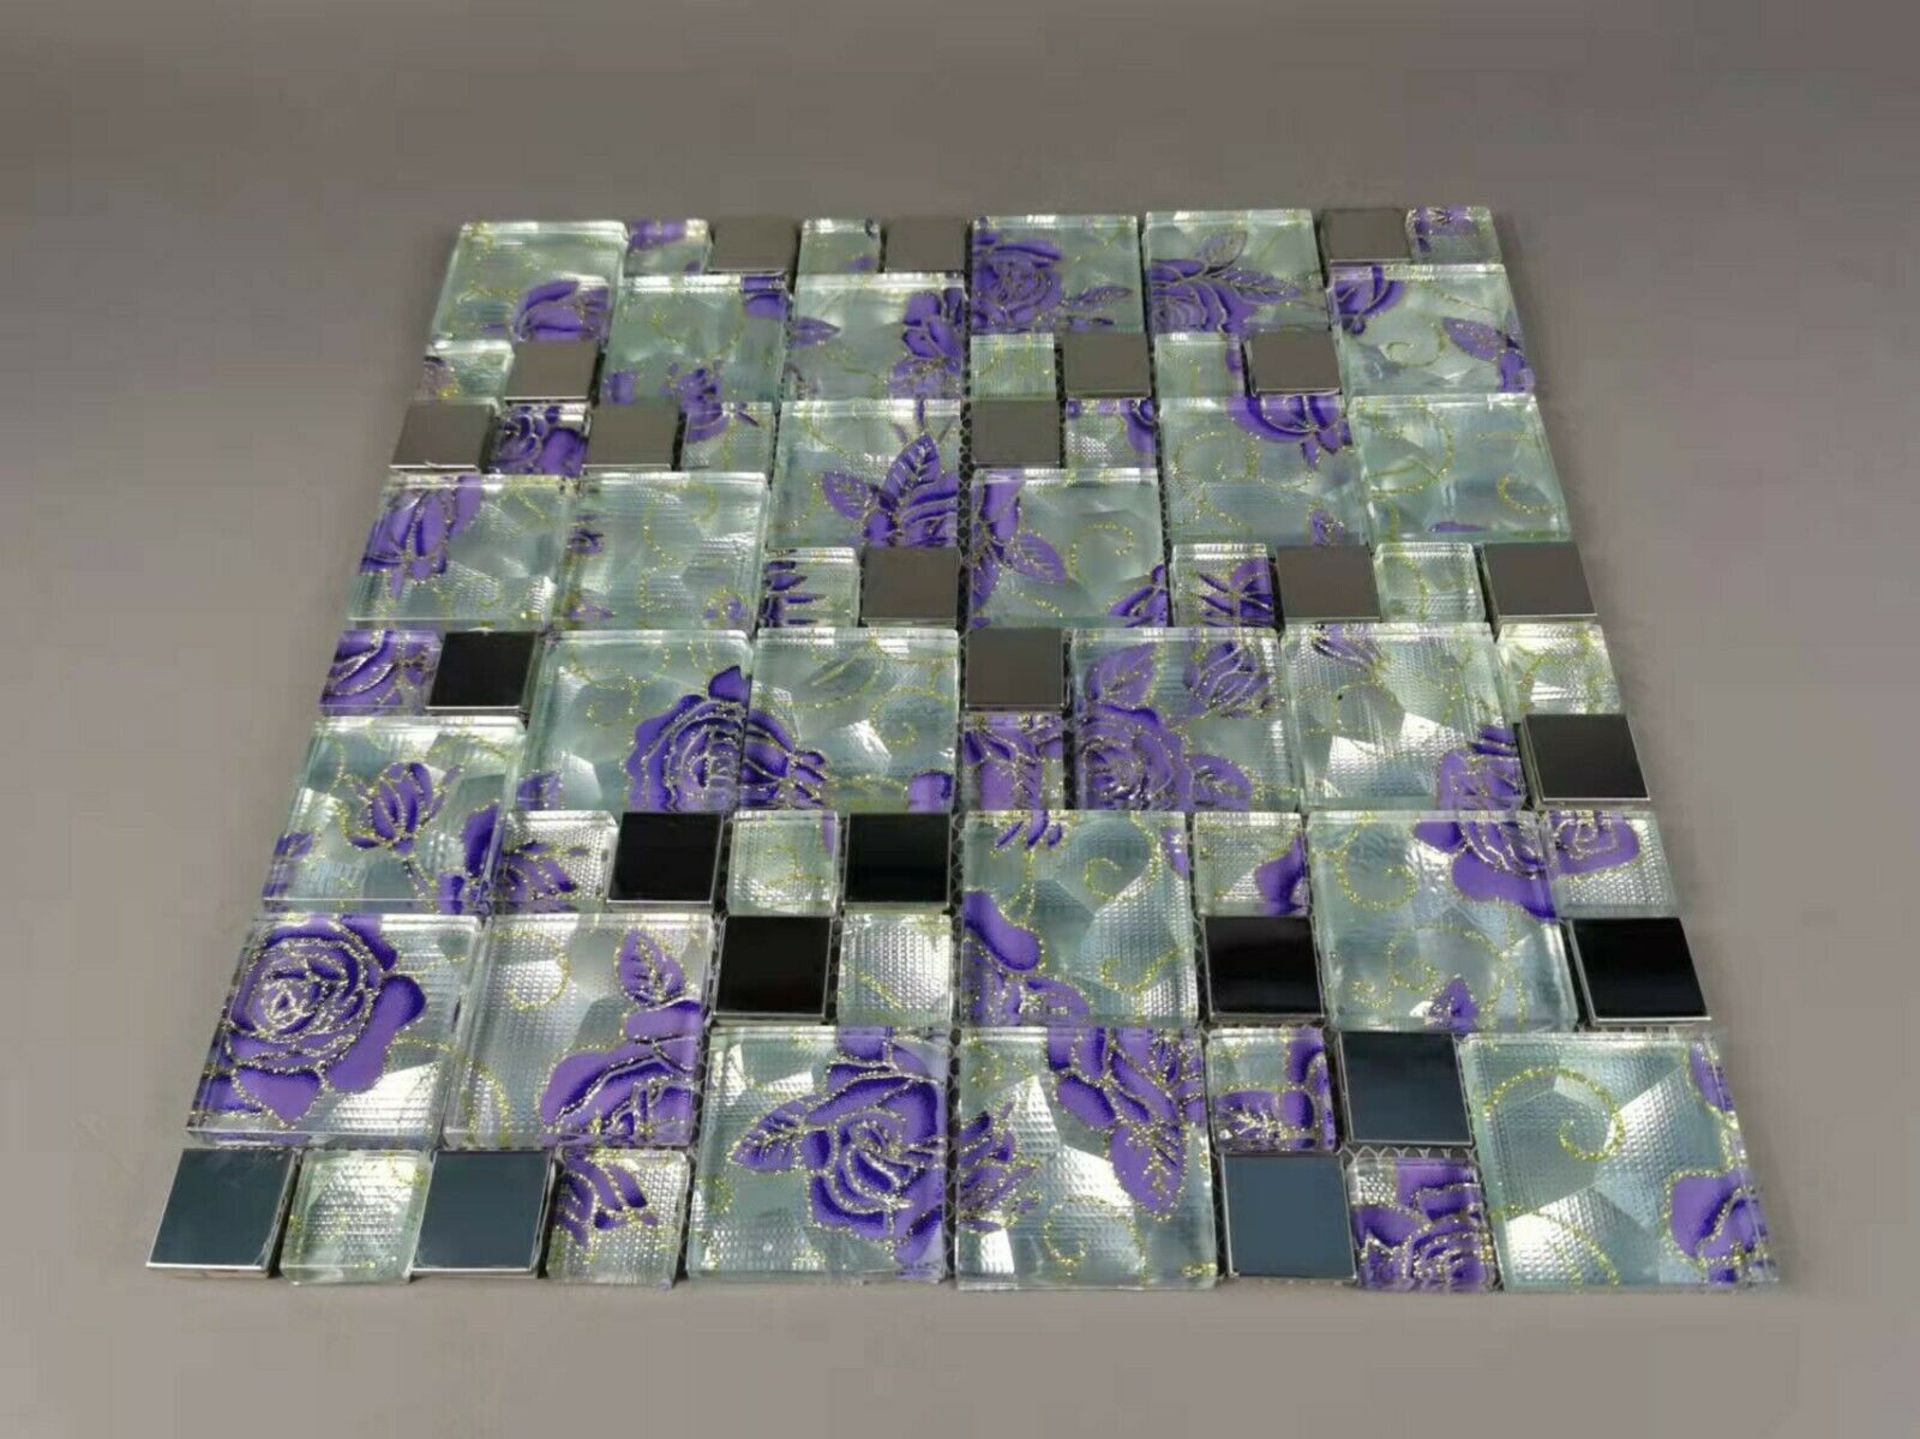 10 Square Metres - High Quality Glass/Stainless Steel Mosaic Tiles - Image 2 of 5